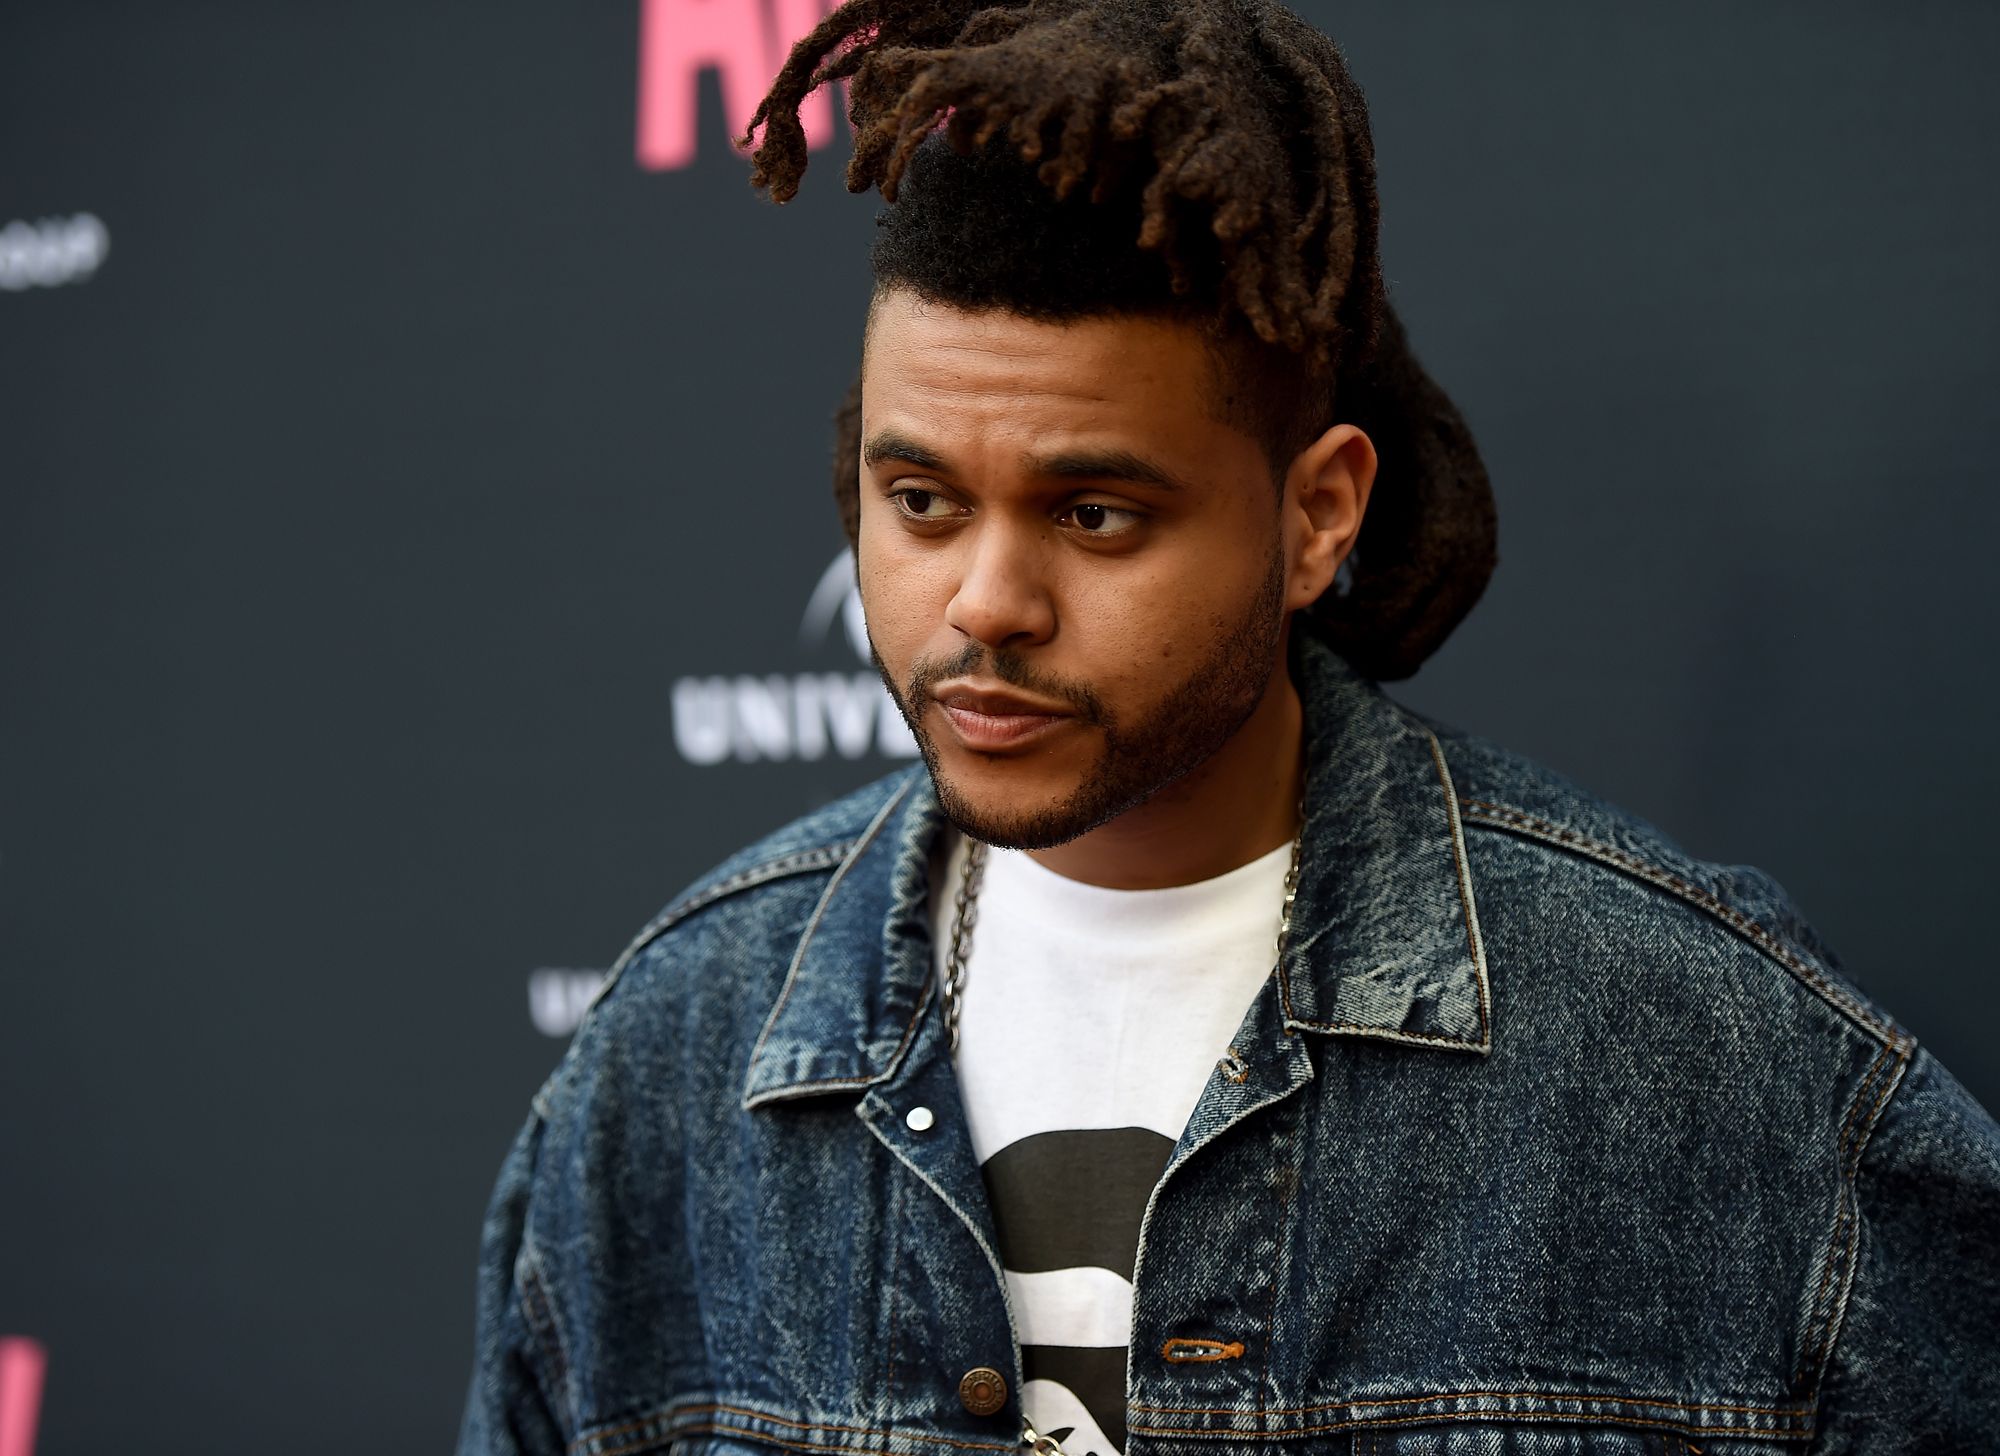 The Weeknd Changed His Hairstyle and Got a Mustache Fans React